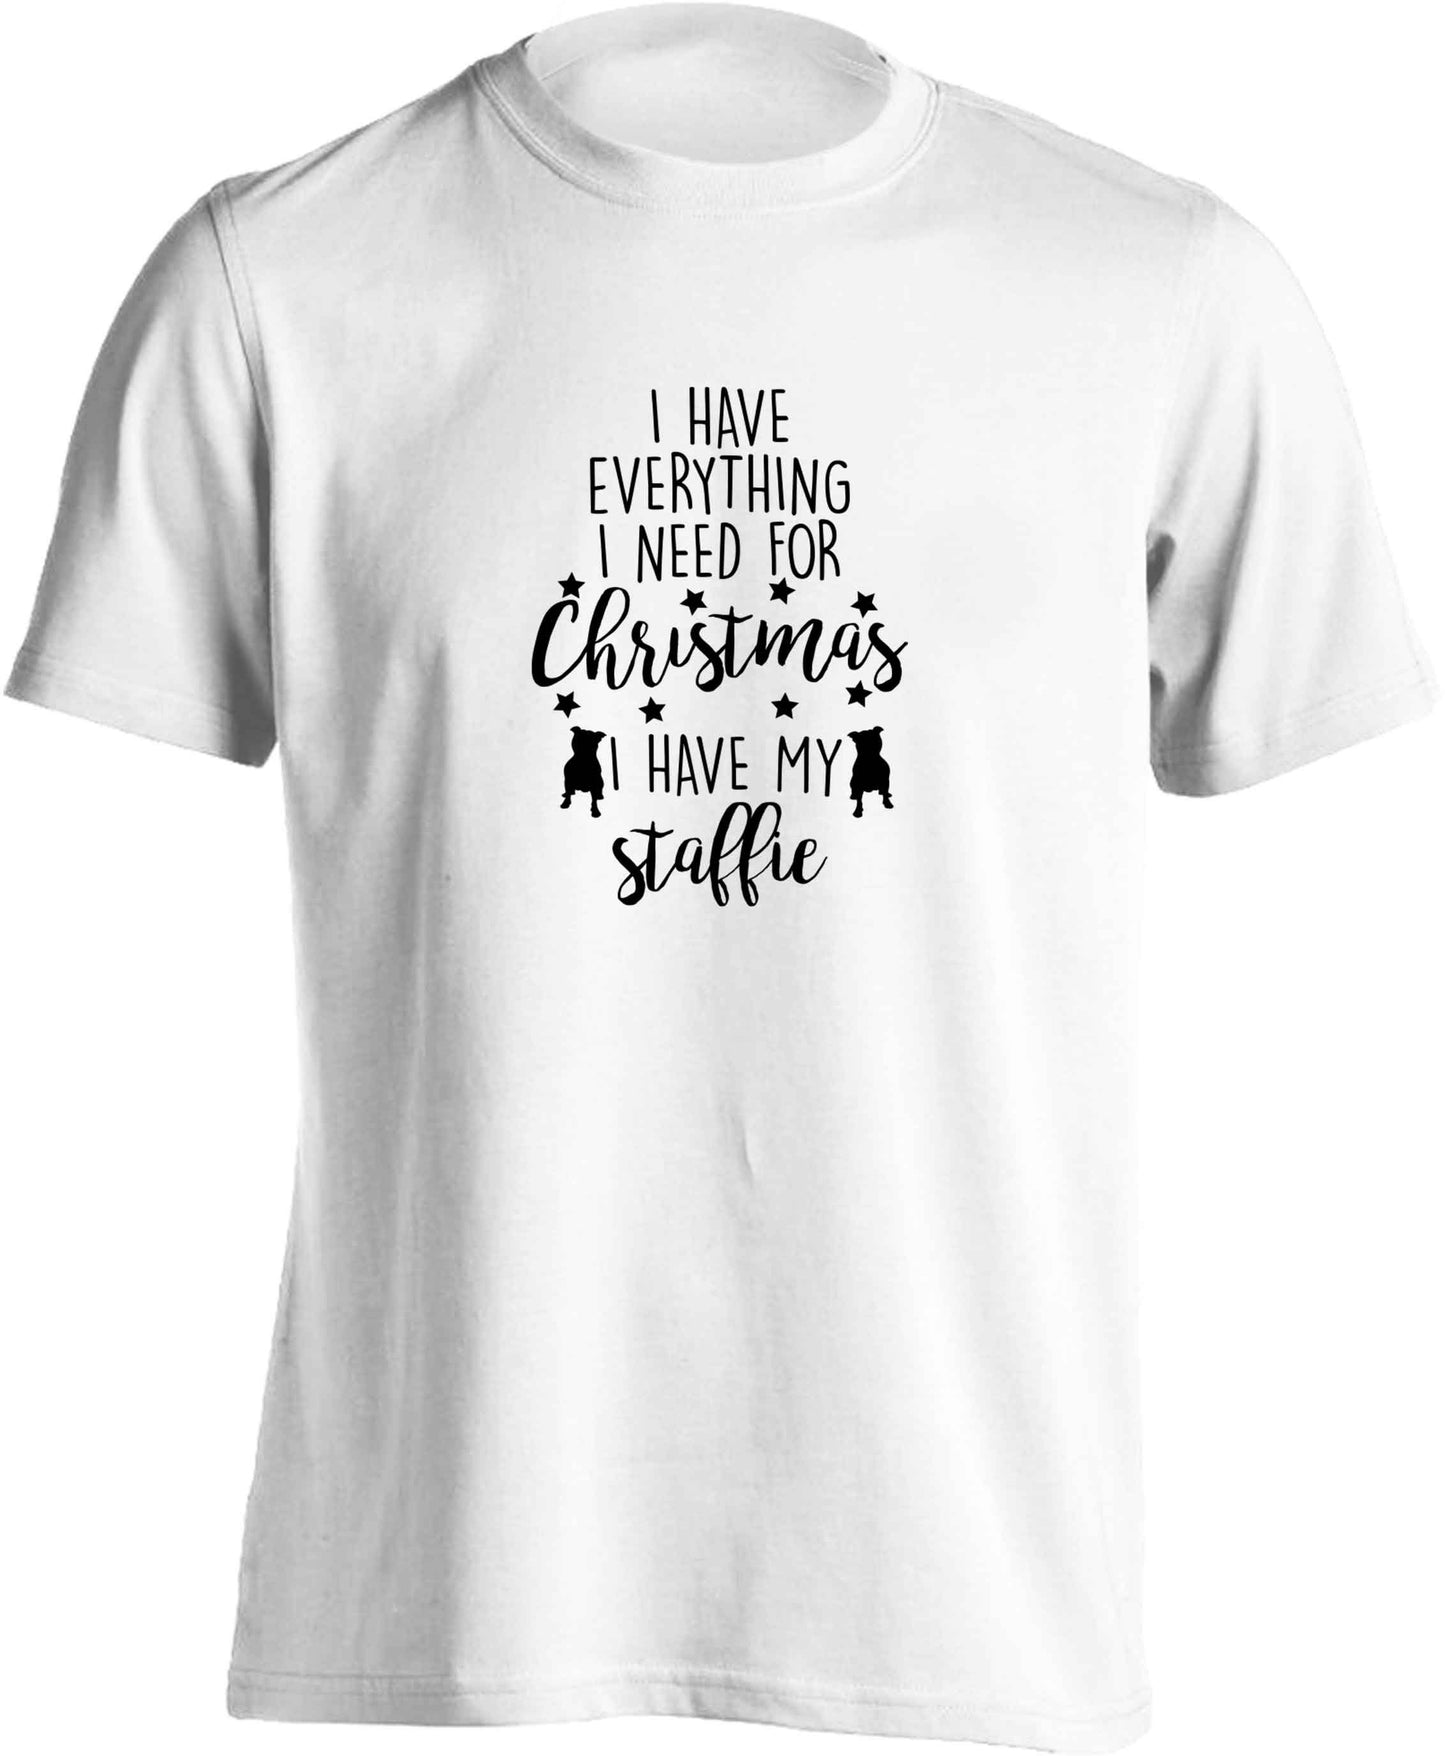 I have everything I need for Christmas I have my staffie adults unisex white Tshirt 2XL